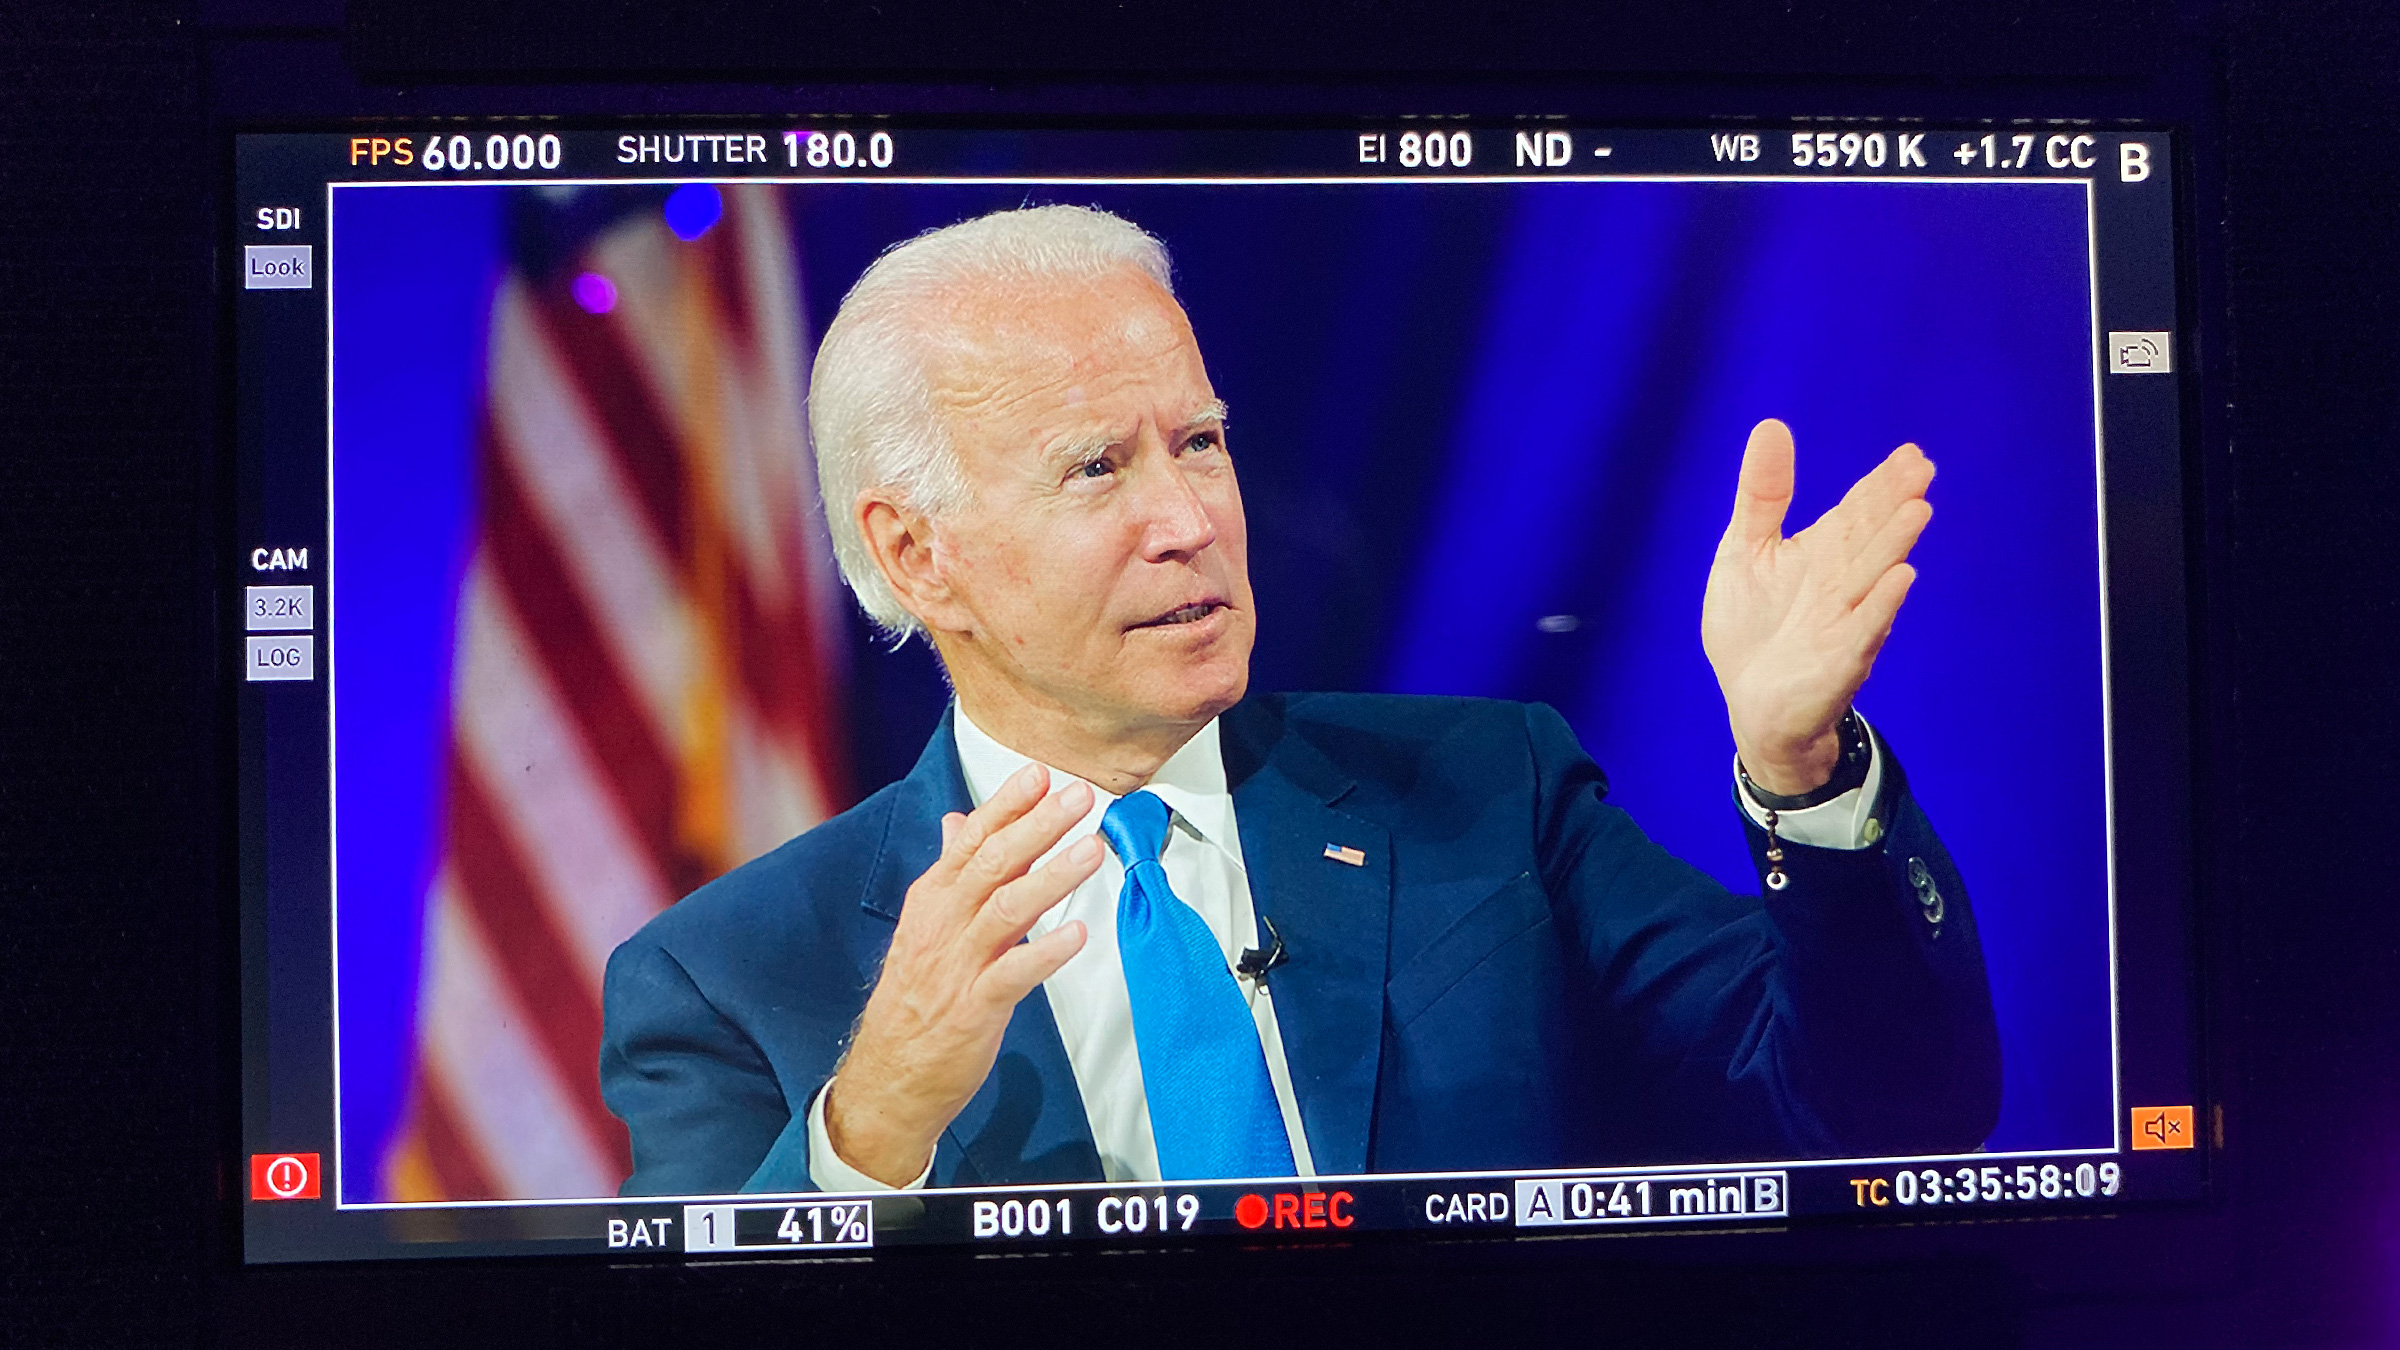 Made in Frame: The 2020 Biden For President Campaign